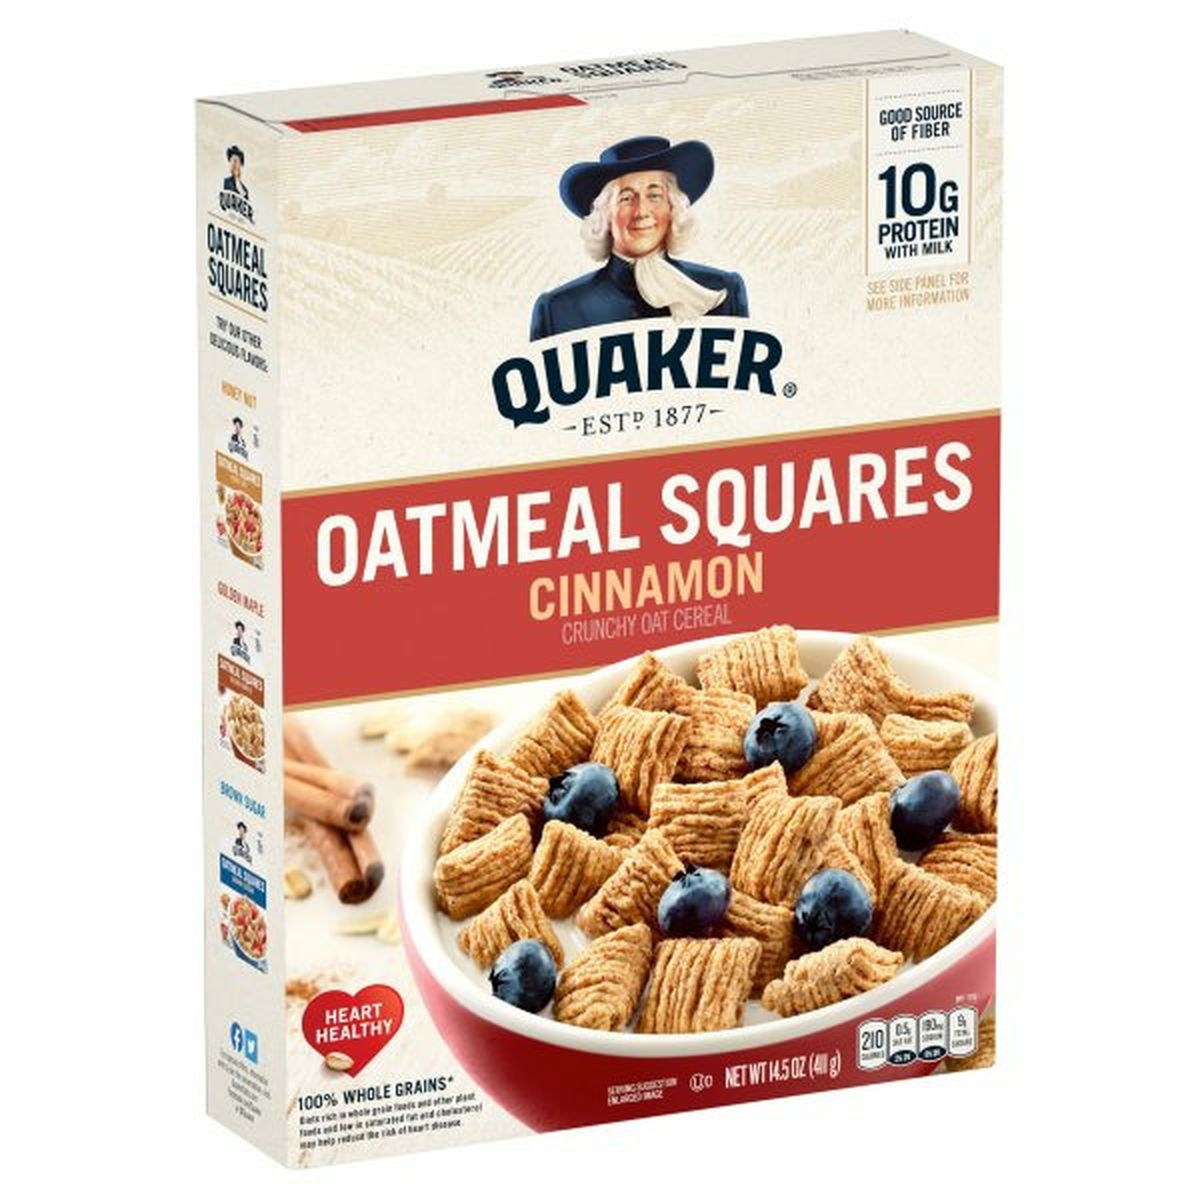 Calories in Quaker Oatmeal Squares Cereal, Cinnamon